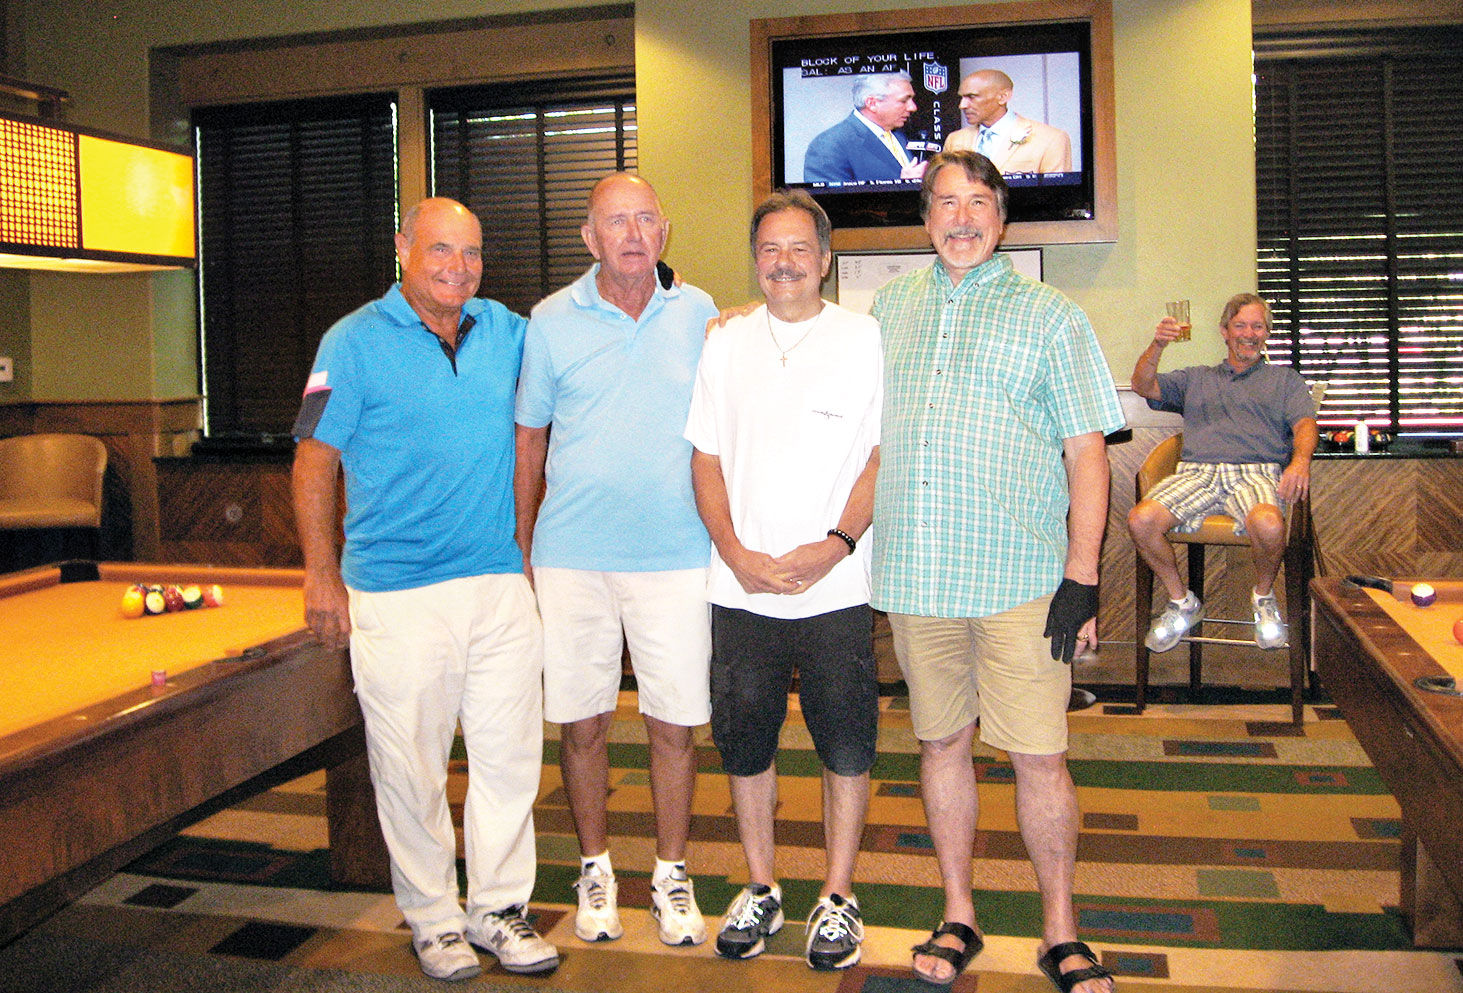 Left to right: Bruce Fink, second place; Larry Tipton, fourth place; Paul “Bankster” Callas, first place; Tom “Half Jacket” Barrett, third place. Lurking in the background is Dominic “The Doctor” Borland sitting in his very familiar chair.